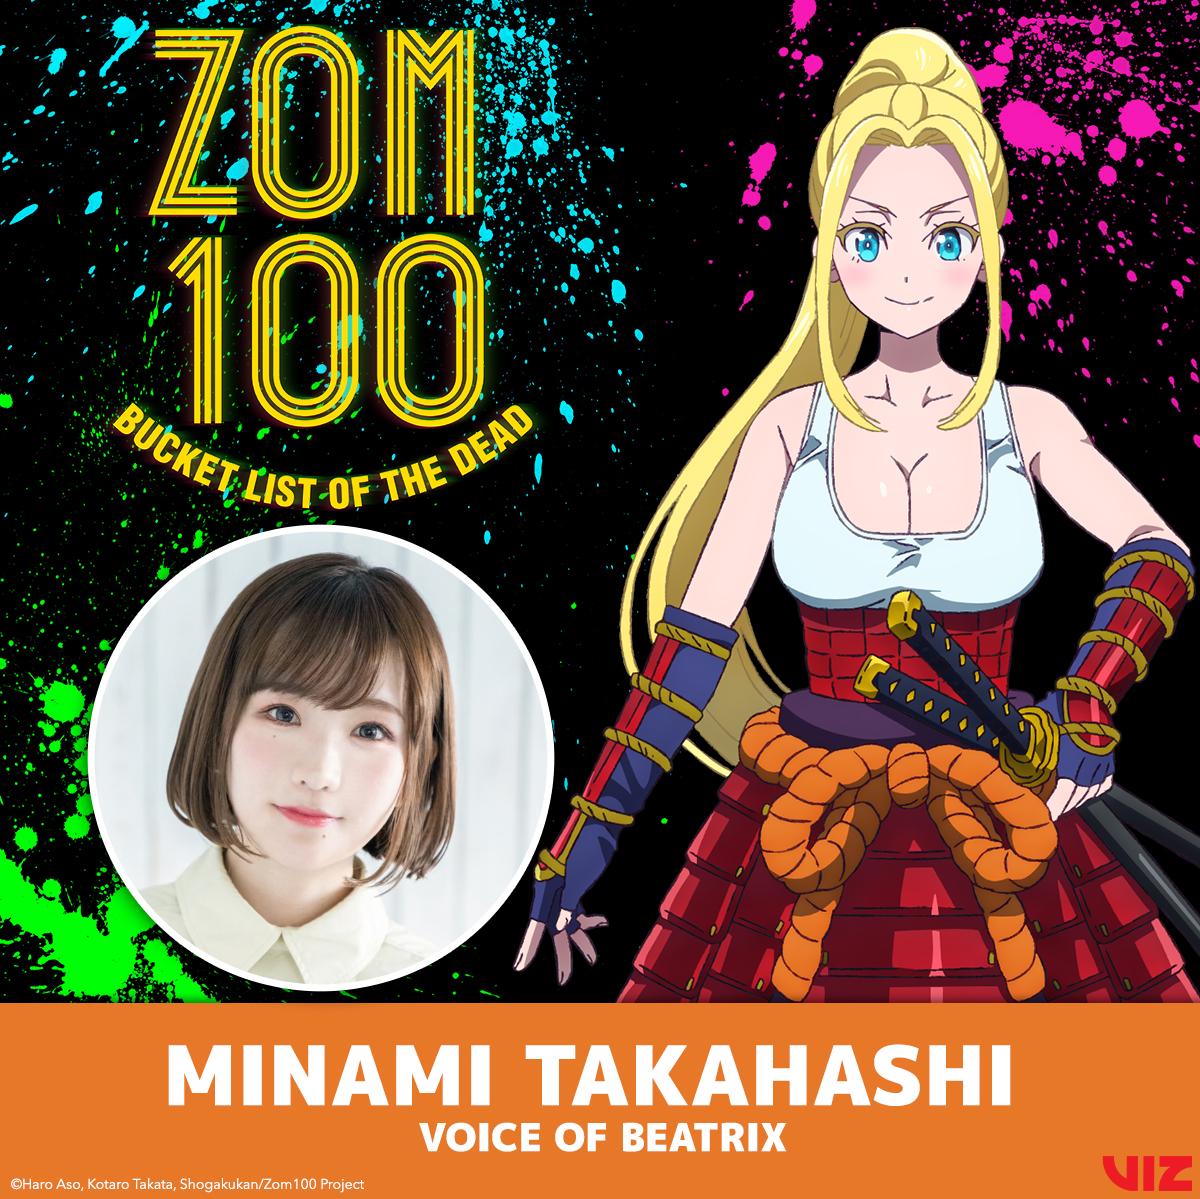 Zom 100 Bucket List of the Dead on X Announcing Minami